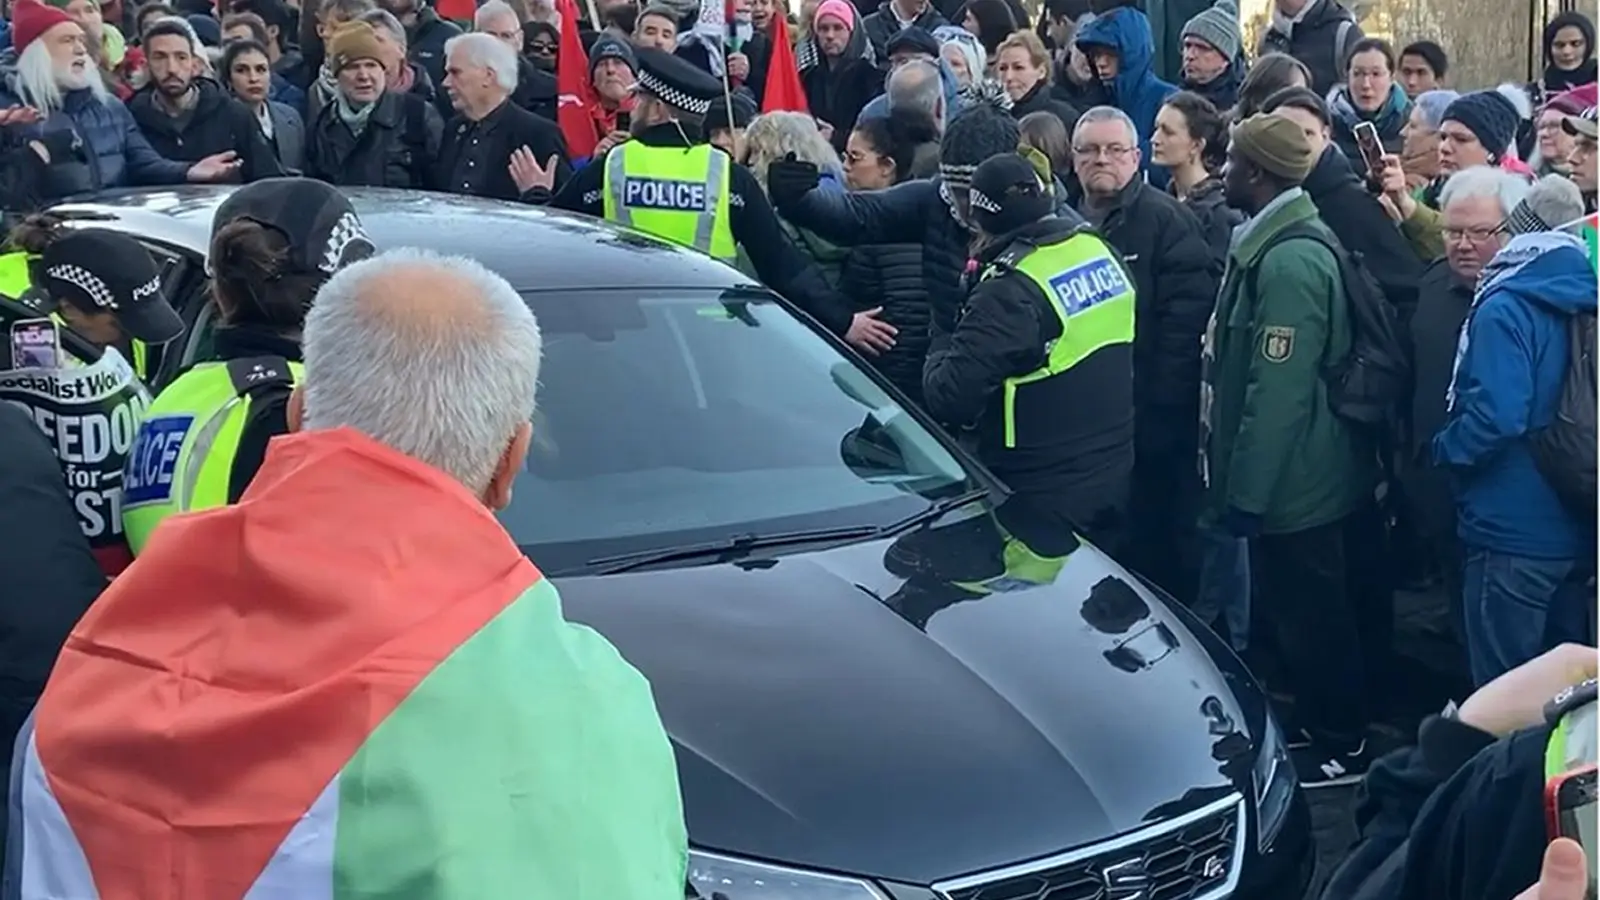 Pro-Palestine Protest in Edinburgh: Woman Arrested After Car Collision